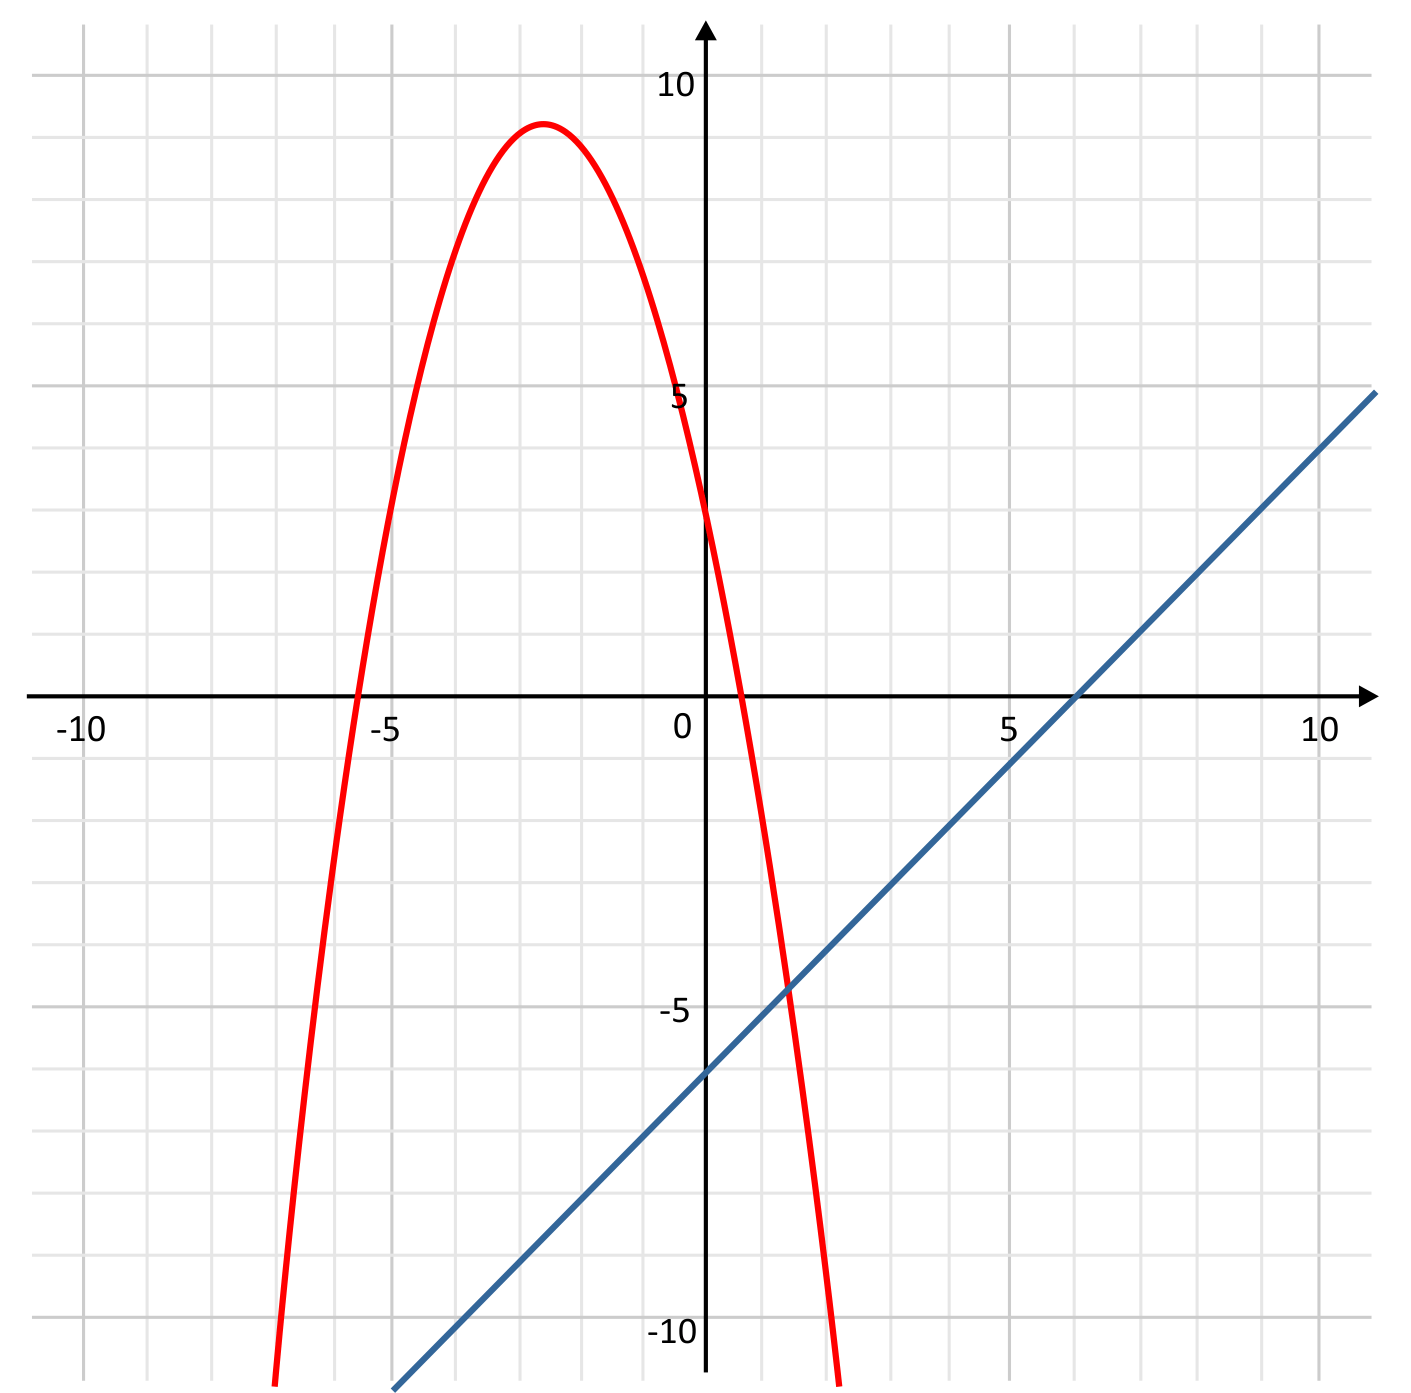 parabola and linear line intersecting around (1.5,-4.5) on a graph